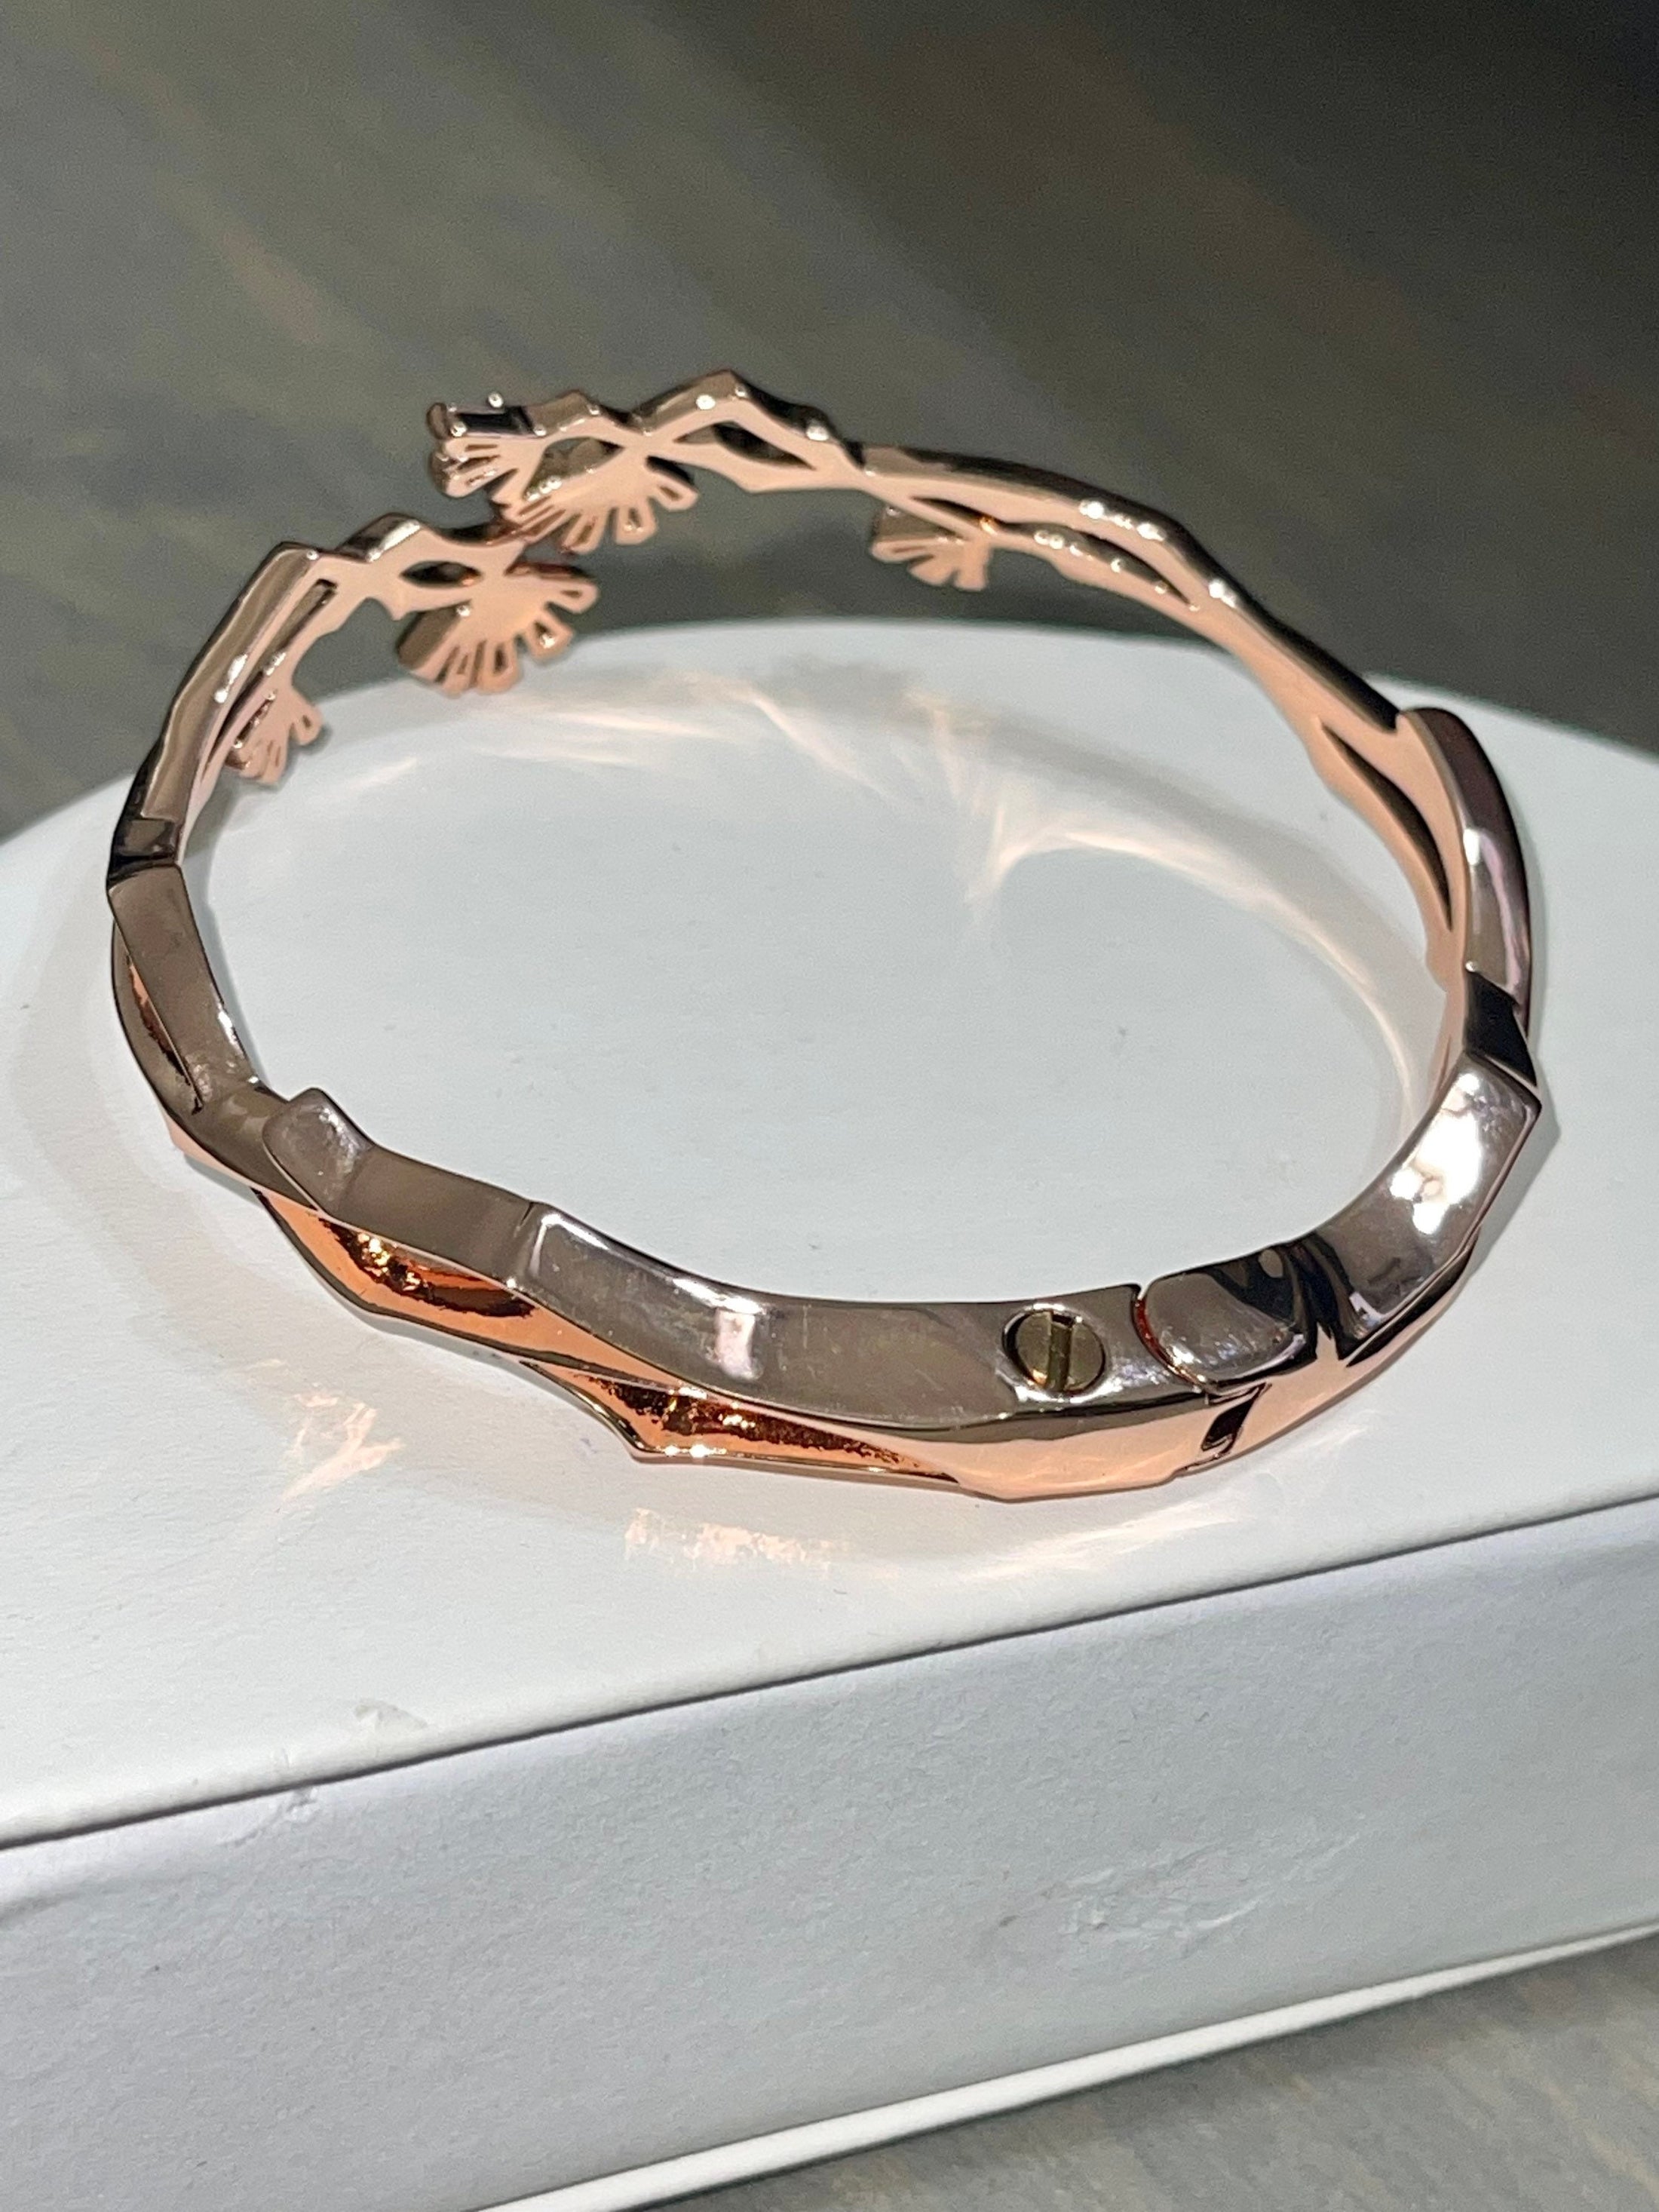 Stunning 10k Rose Gold Vermeil Urn Bangle For Ashes, custom designed one of a kind keepsake jewelry, Ash Holder, Cremation Jewelry, Crystals